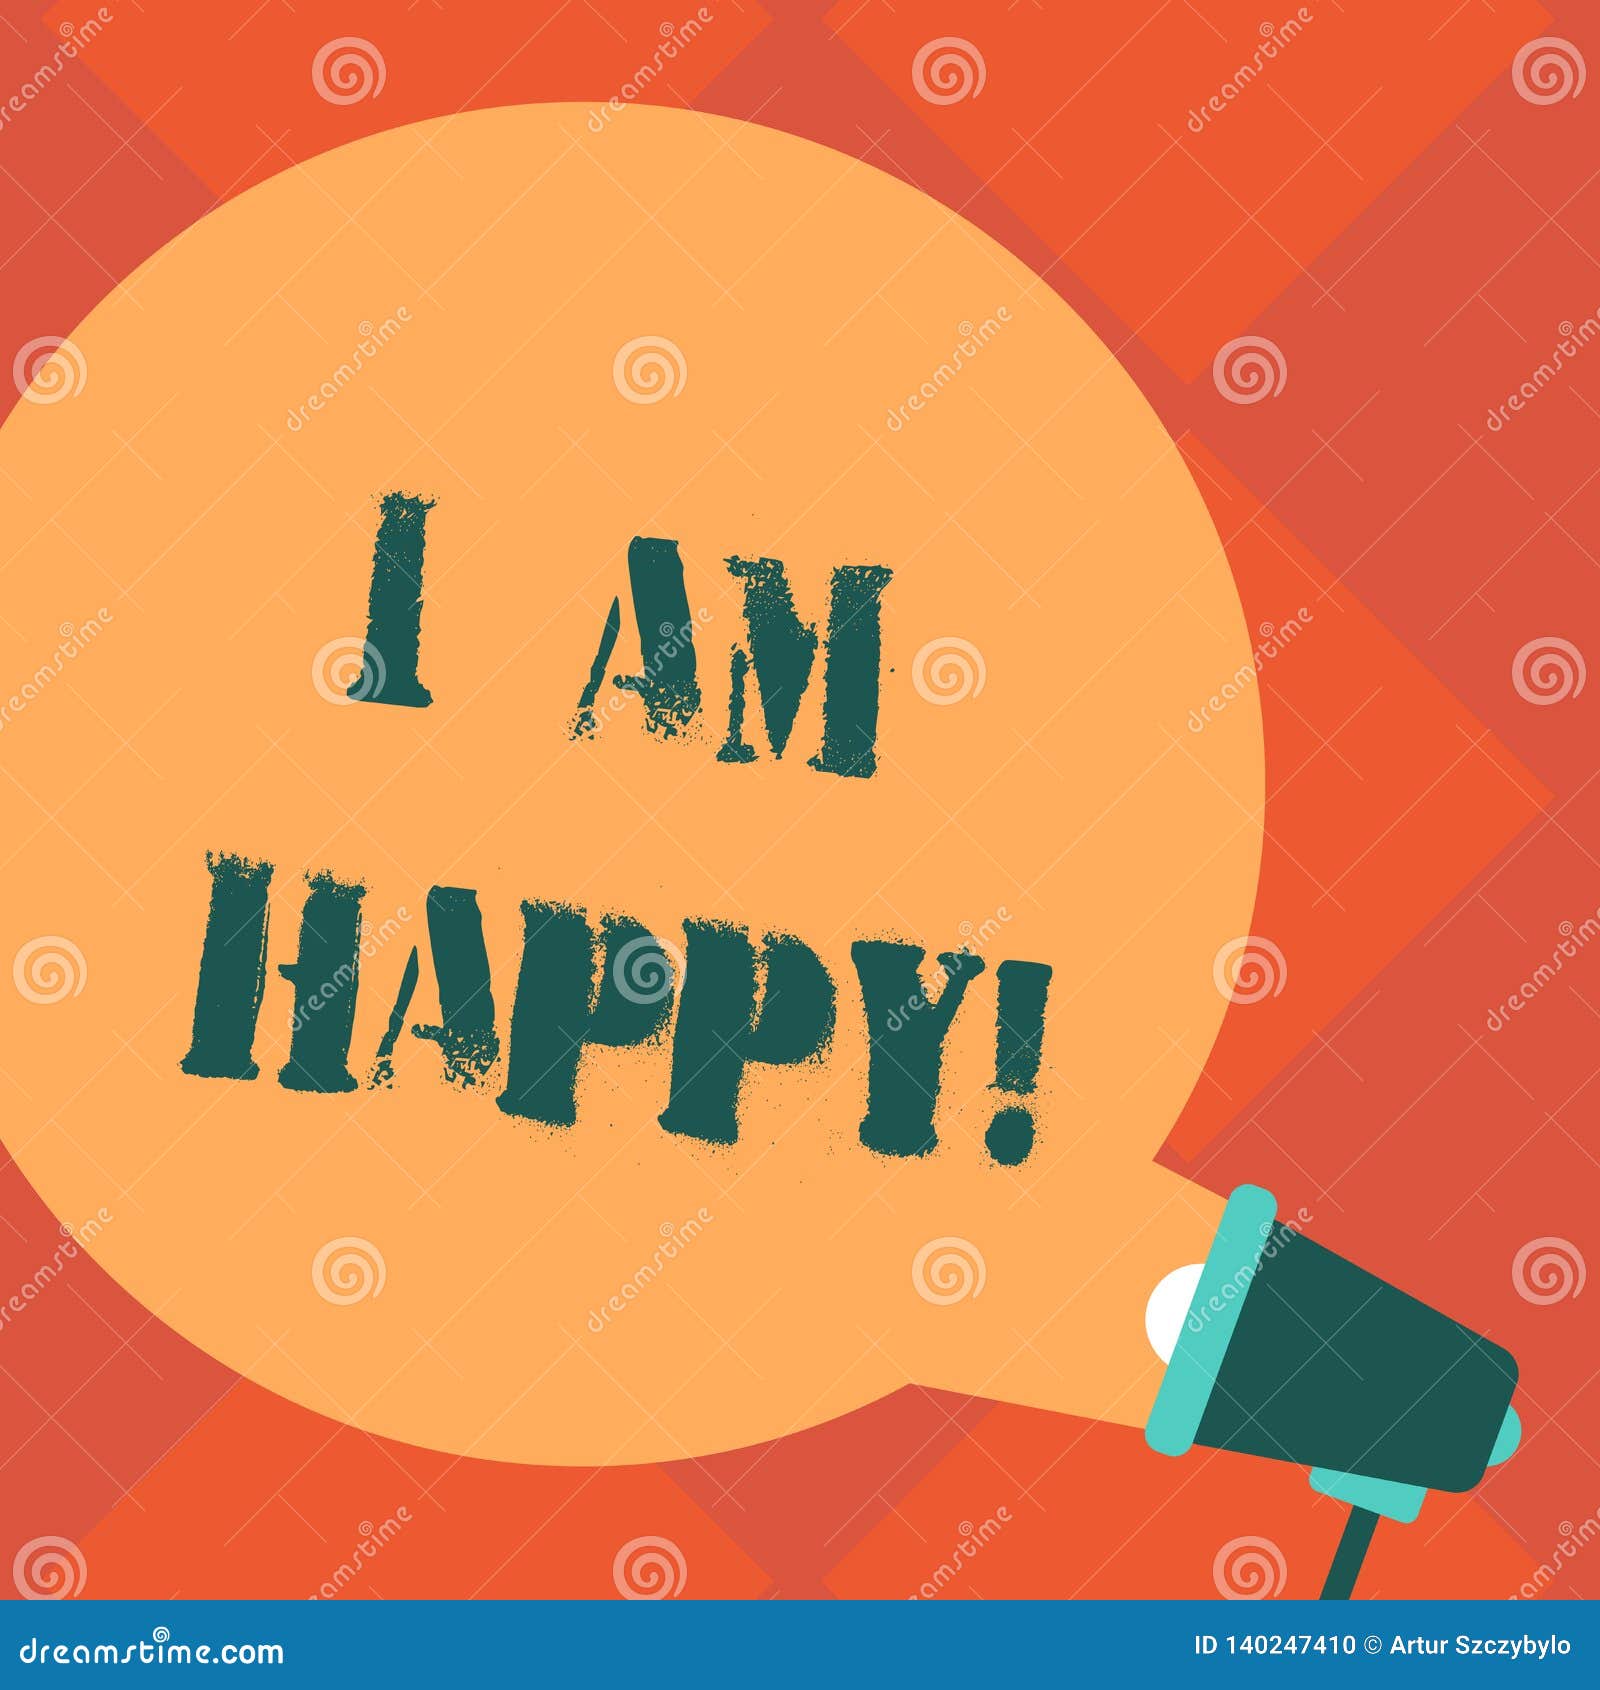 Handwriting Text I Am Happy Concept Meaning To Have A Fulfilled Life Full Of Love Good Job Happiness Blank Round Color Speech Stock Illustration Illustration Of Future Positive